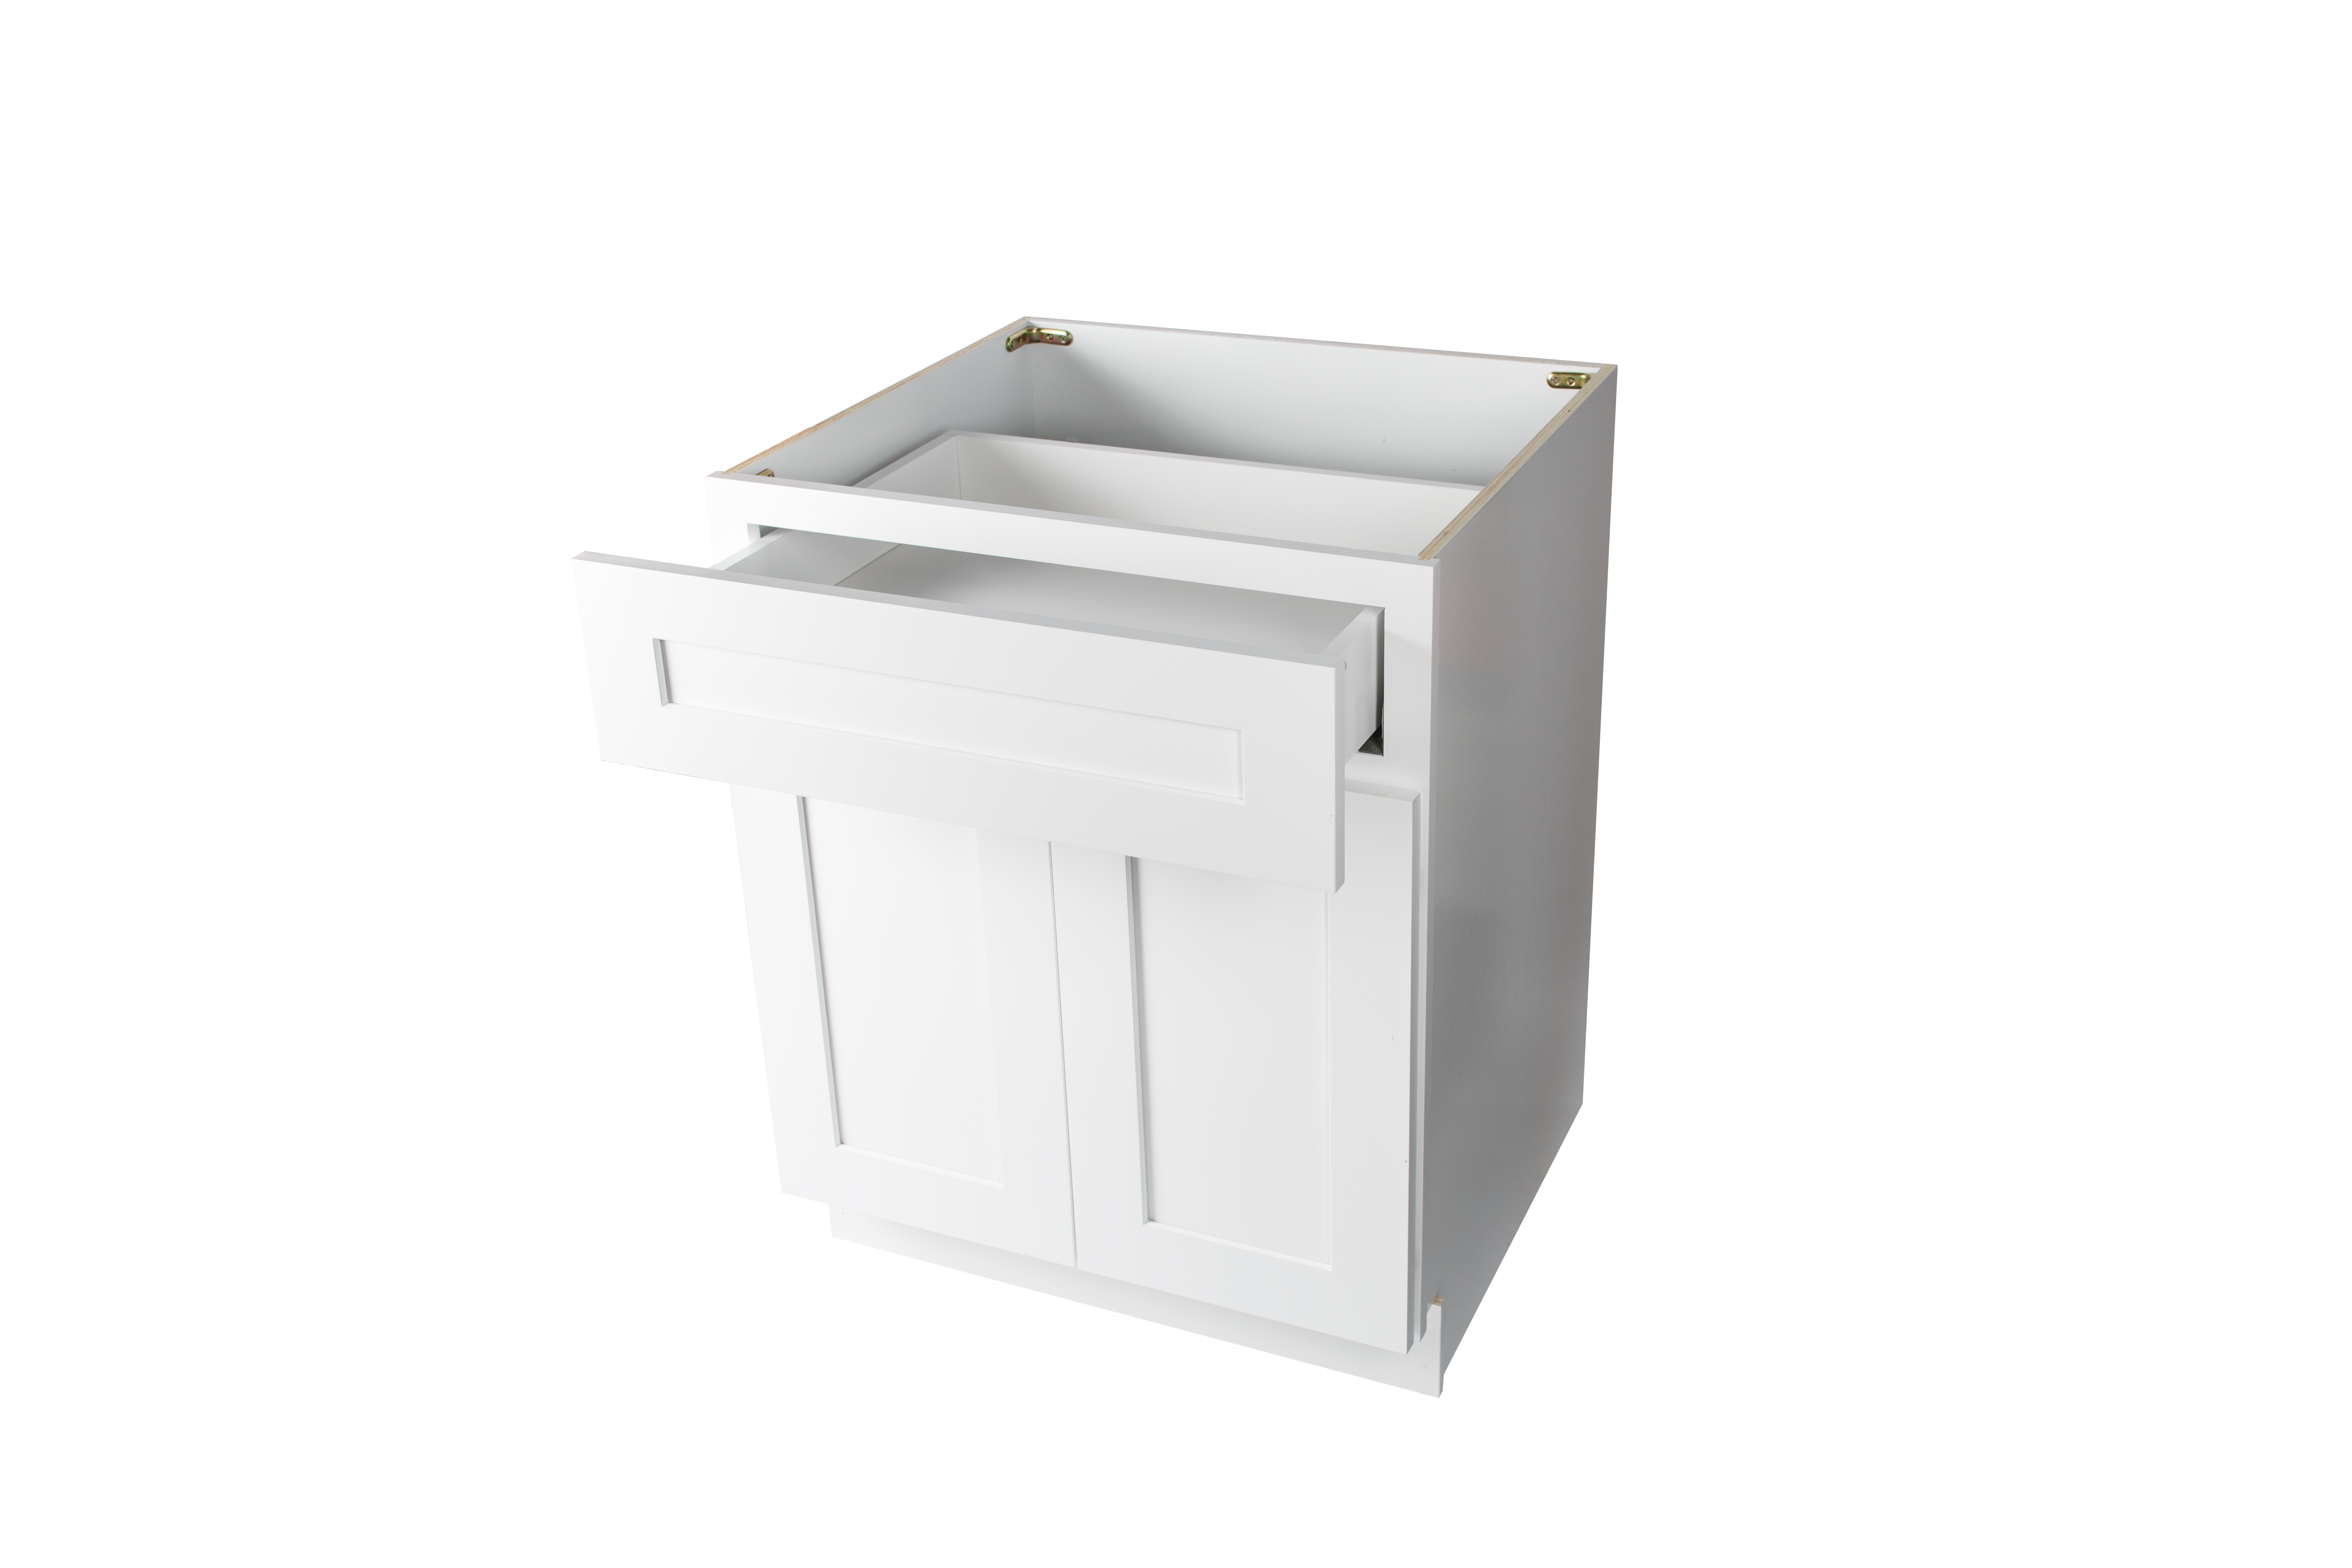 Ready to Assemble 30Wx34.5Hx24D in. Shaker Base Cabinet with 2 Door and 2 Drawer in White